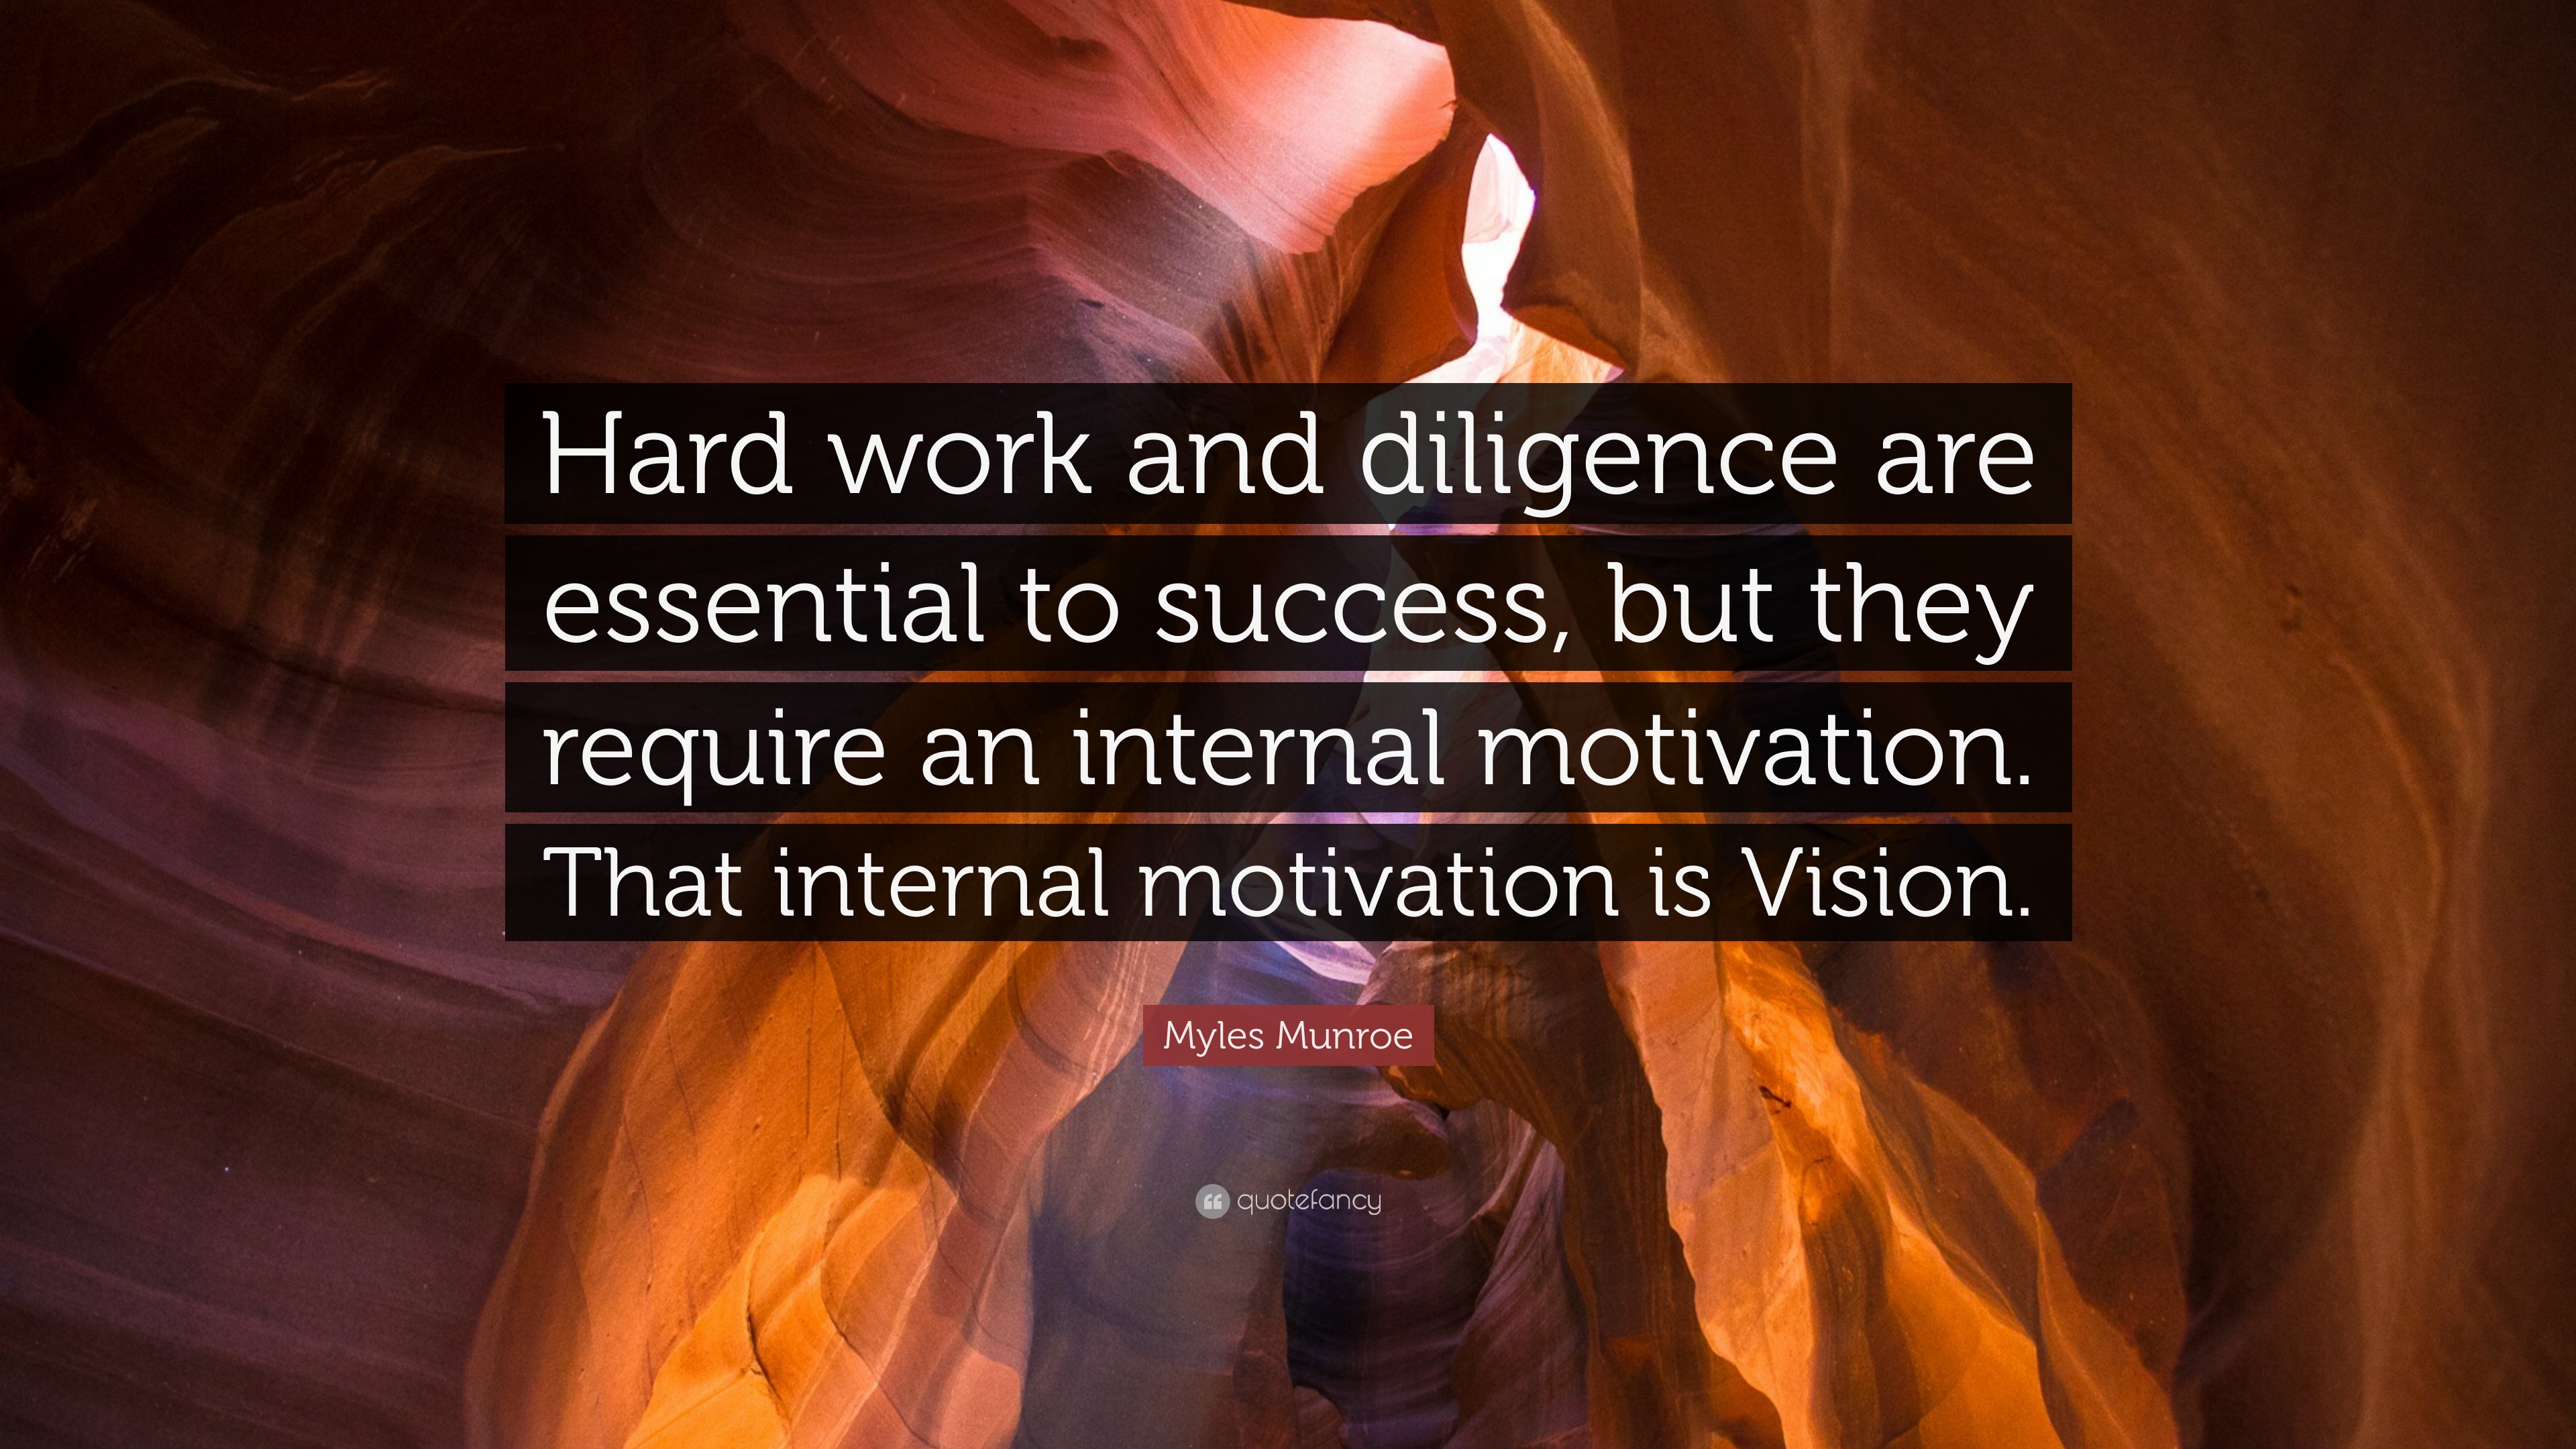 4696555 Myles Munroe Quote Hard work and diligence are essential to